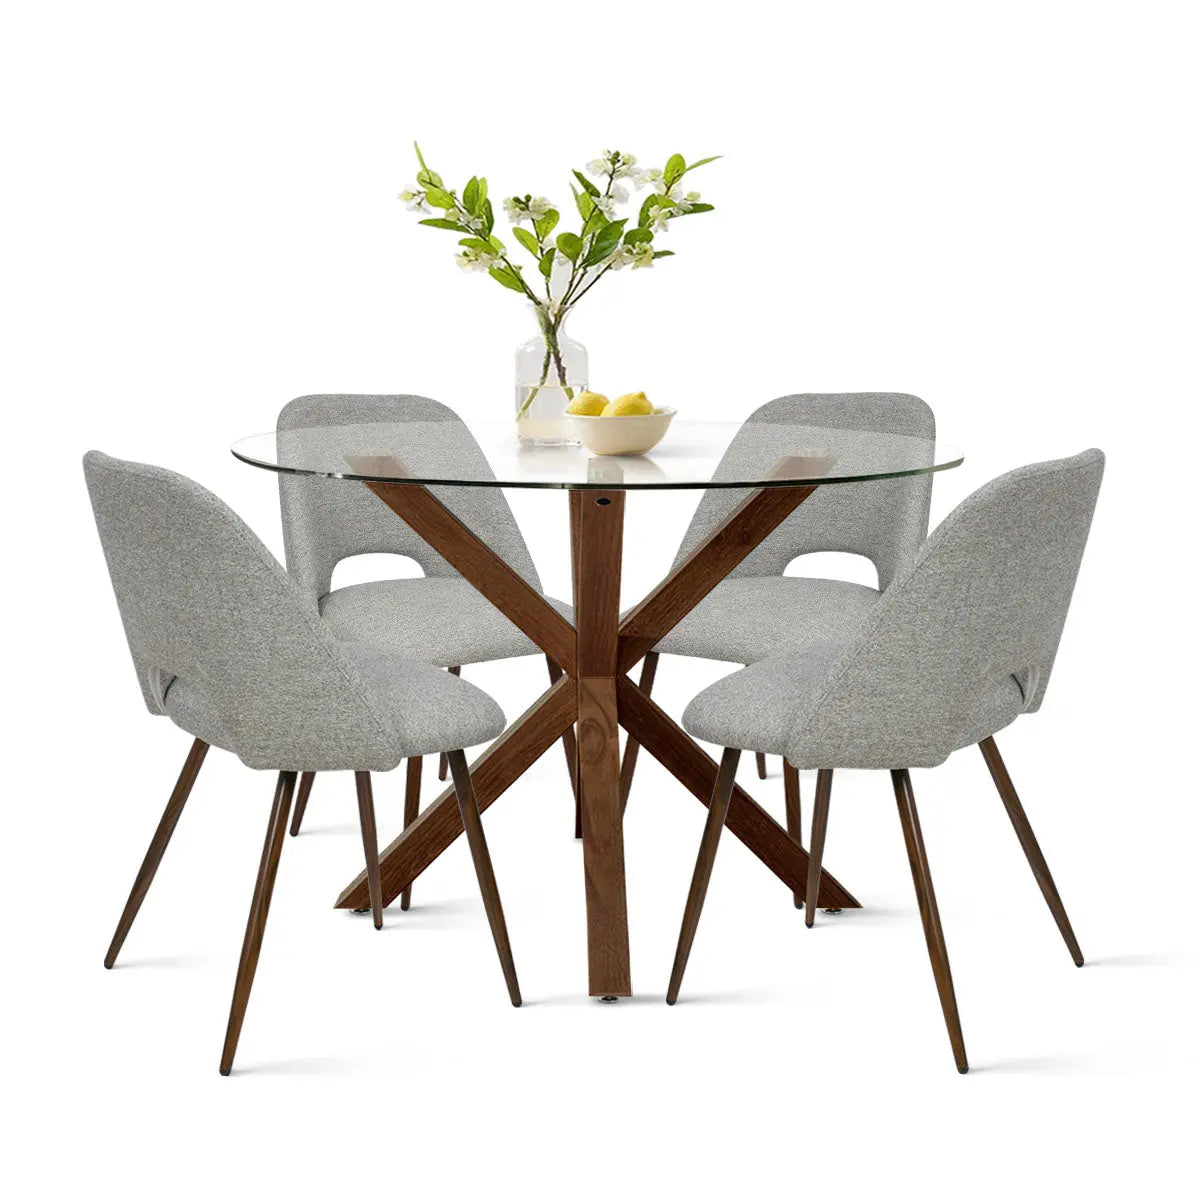 Edwin 4- Person Glass Round Dining Set